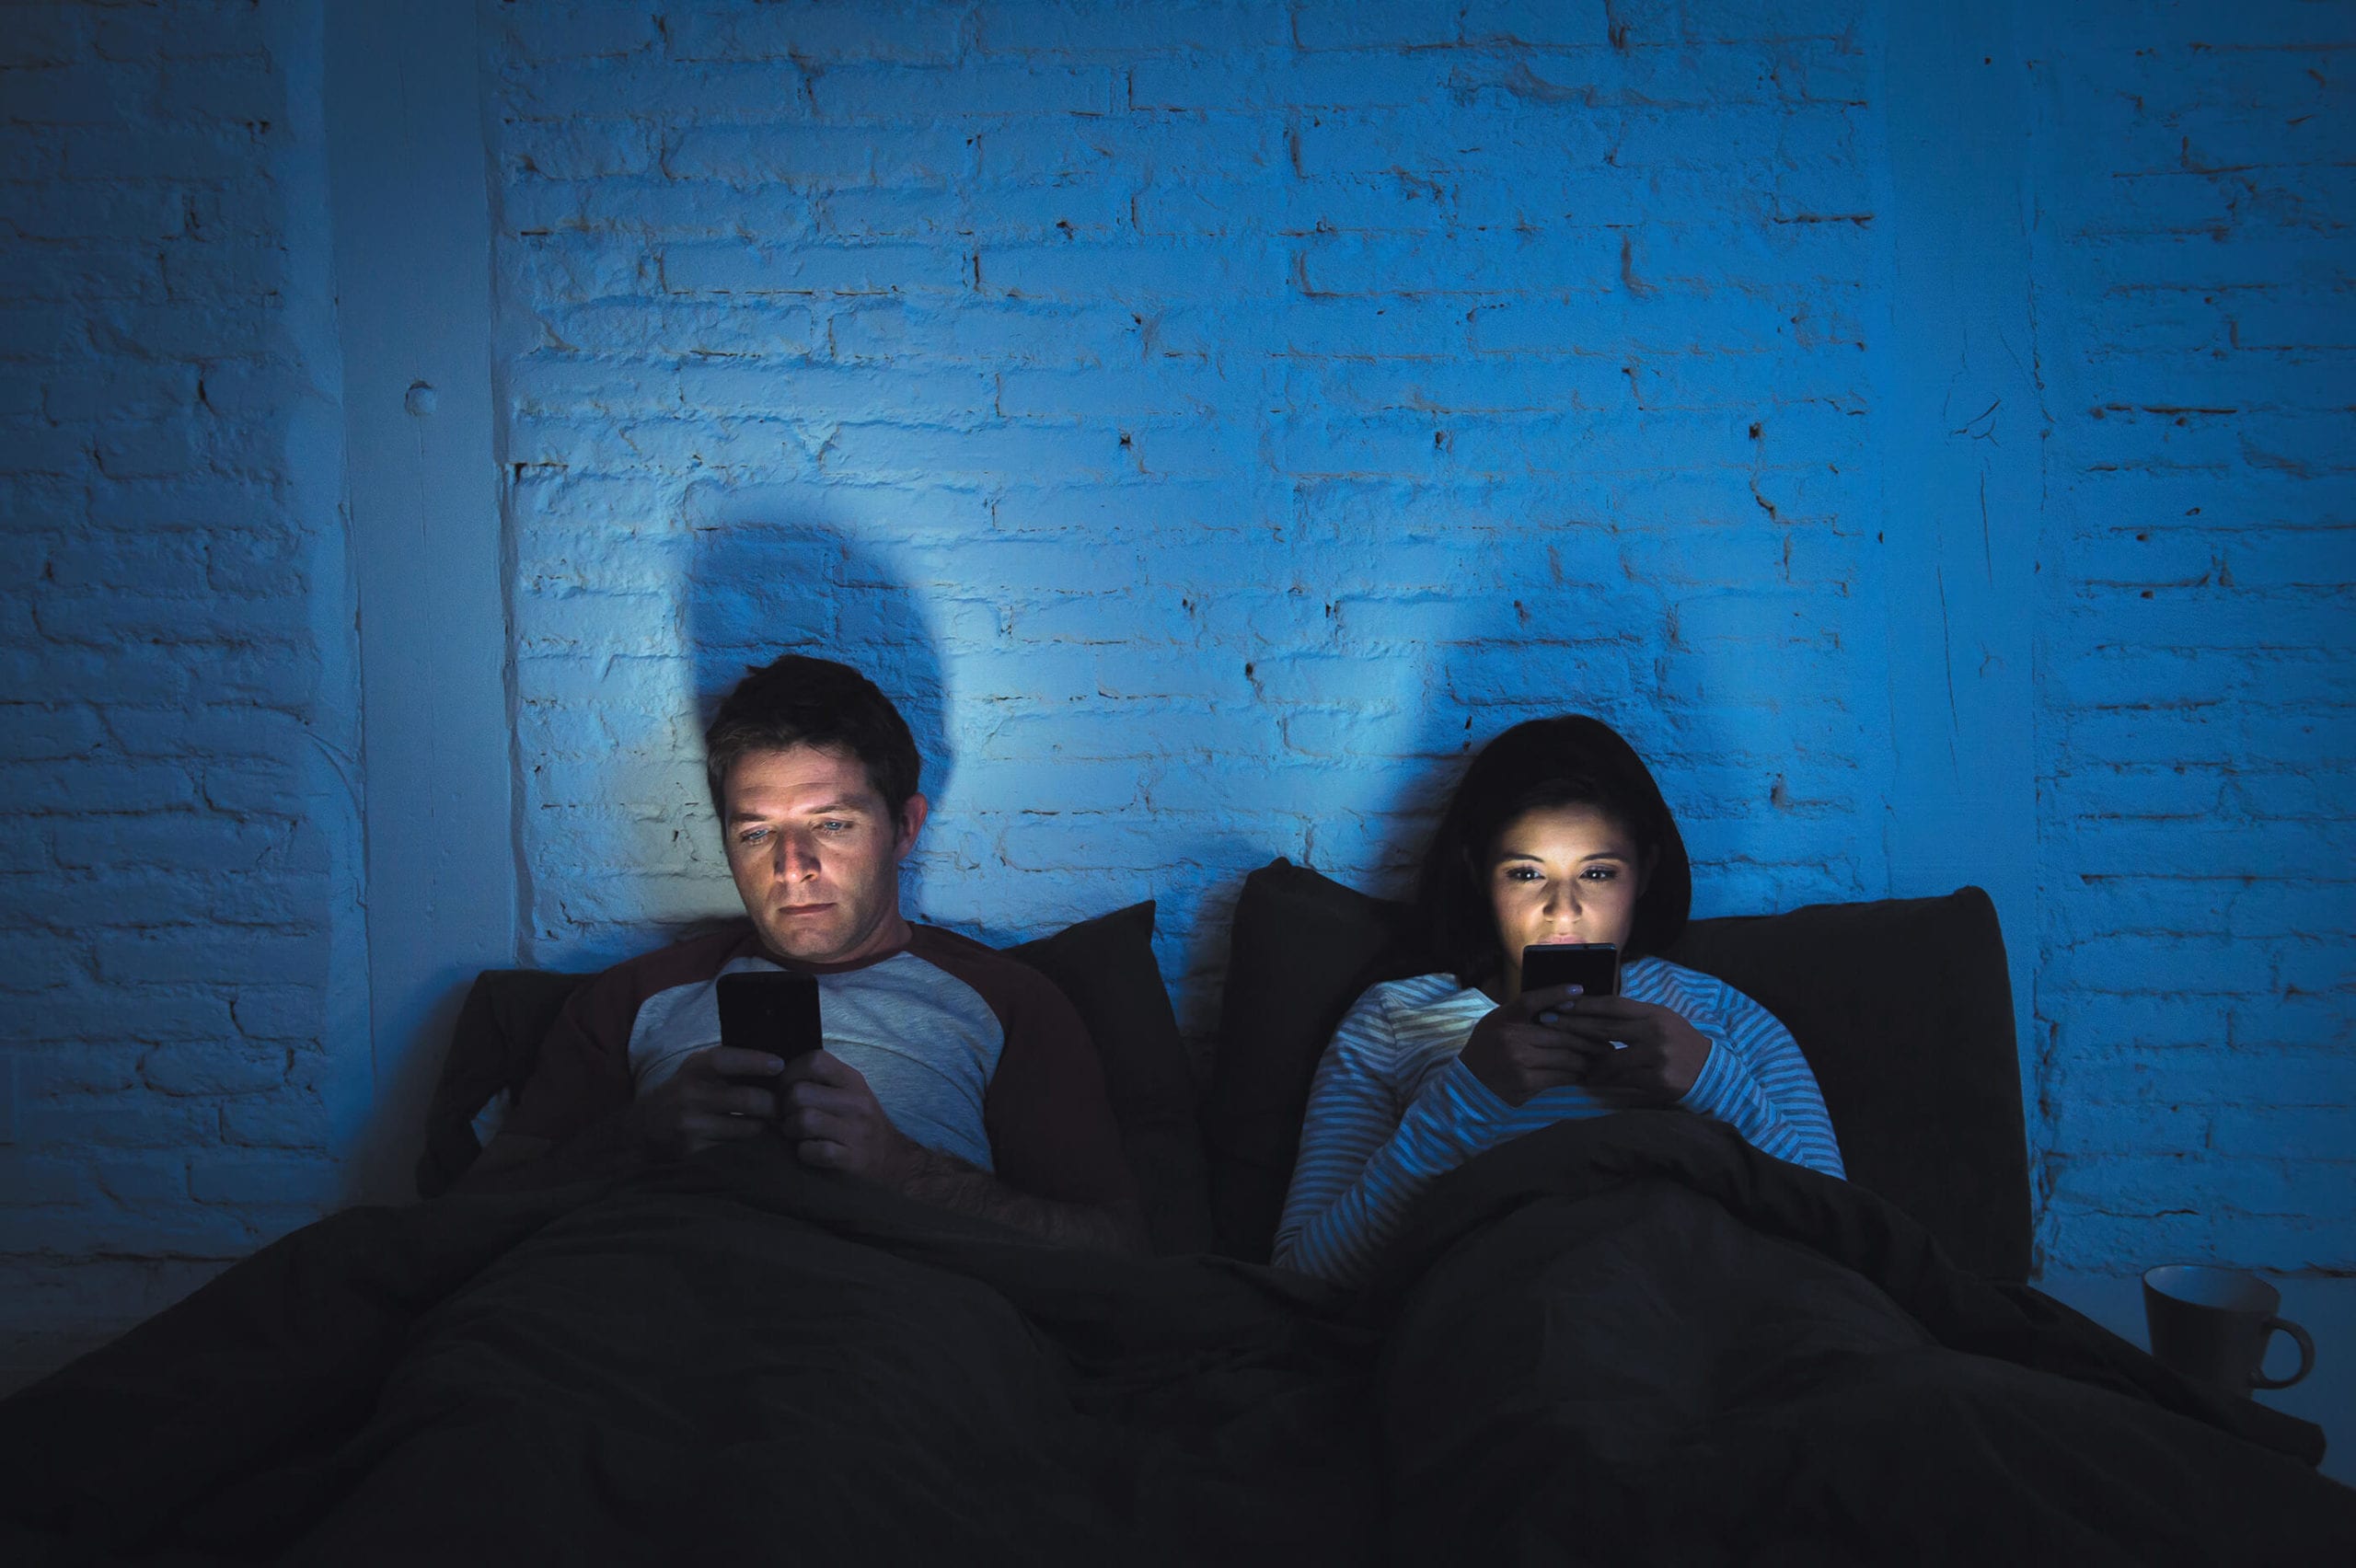 Two people sitting in bed engrossed in their own mobile device.